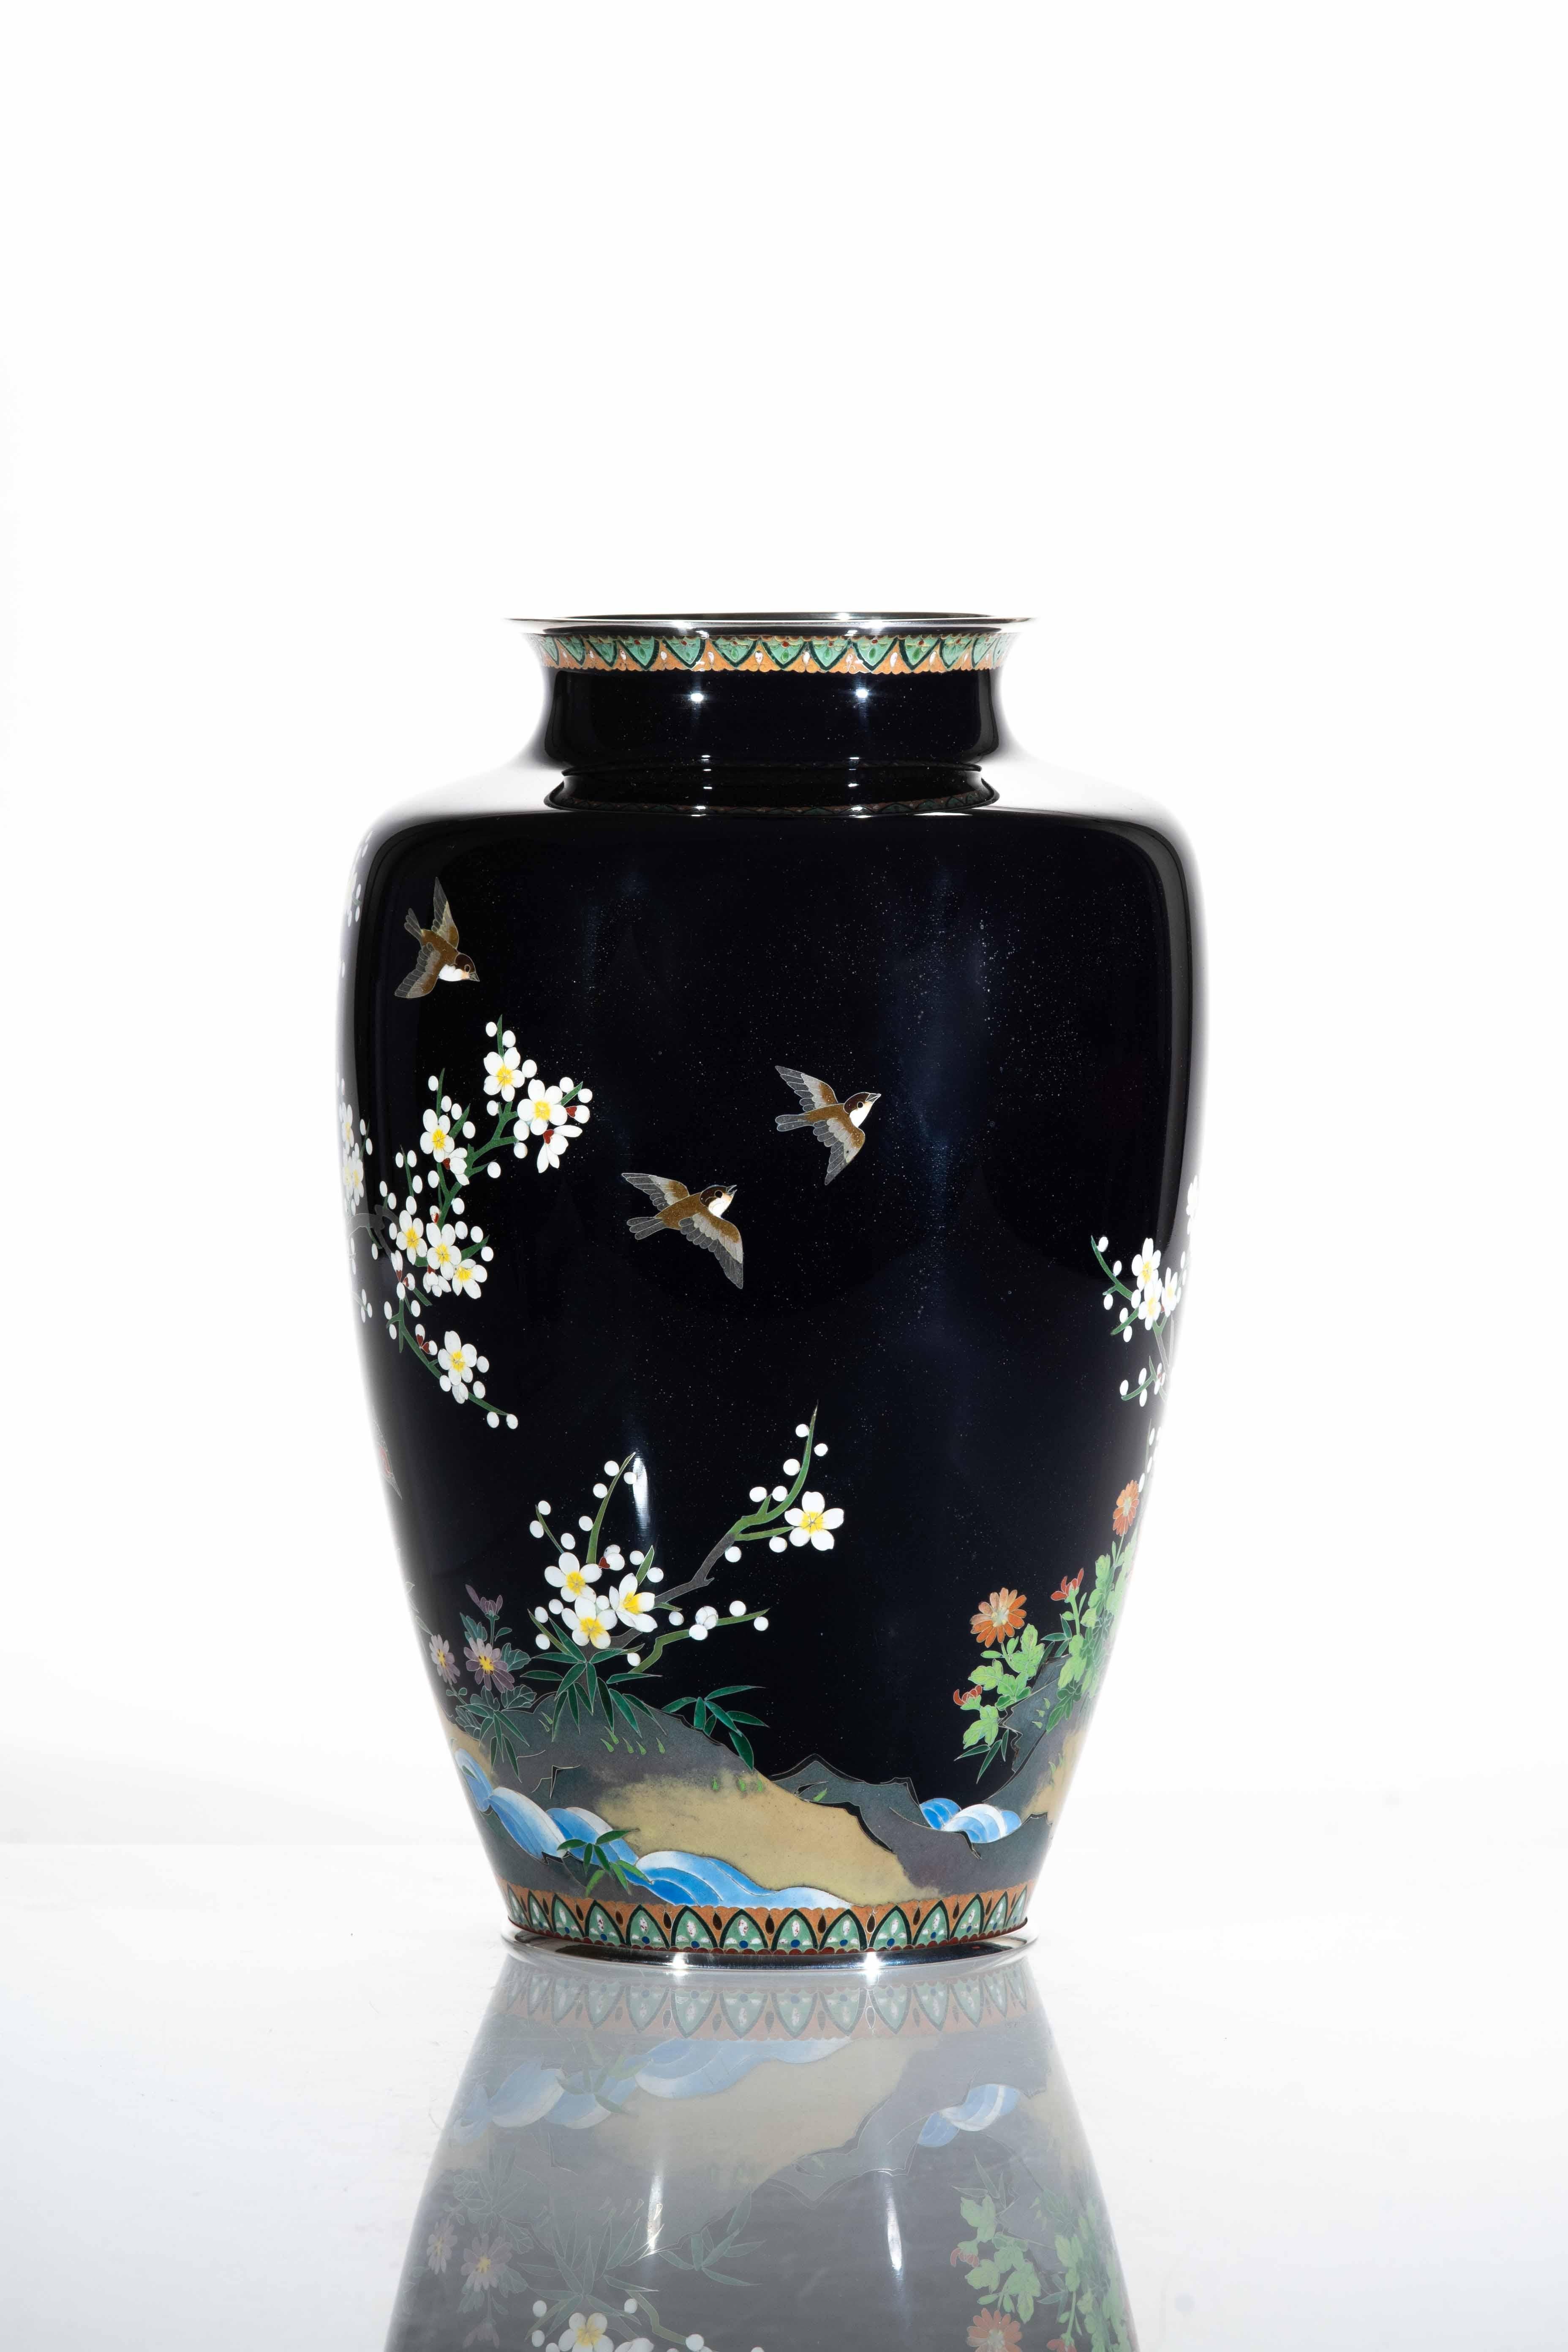 Cloisonné vase, with base and edge in silver, decorated with polychrome enamels held by a silver thread, depicting a pheasant on the banks of a watercourse surrounded by blooming cherry blossoms and chrysanthemums.

The pheasant, chrysanthemums and